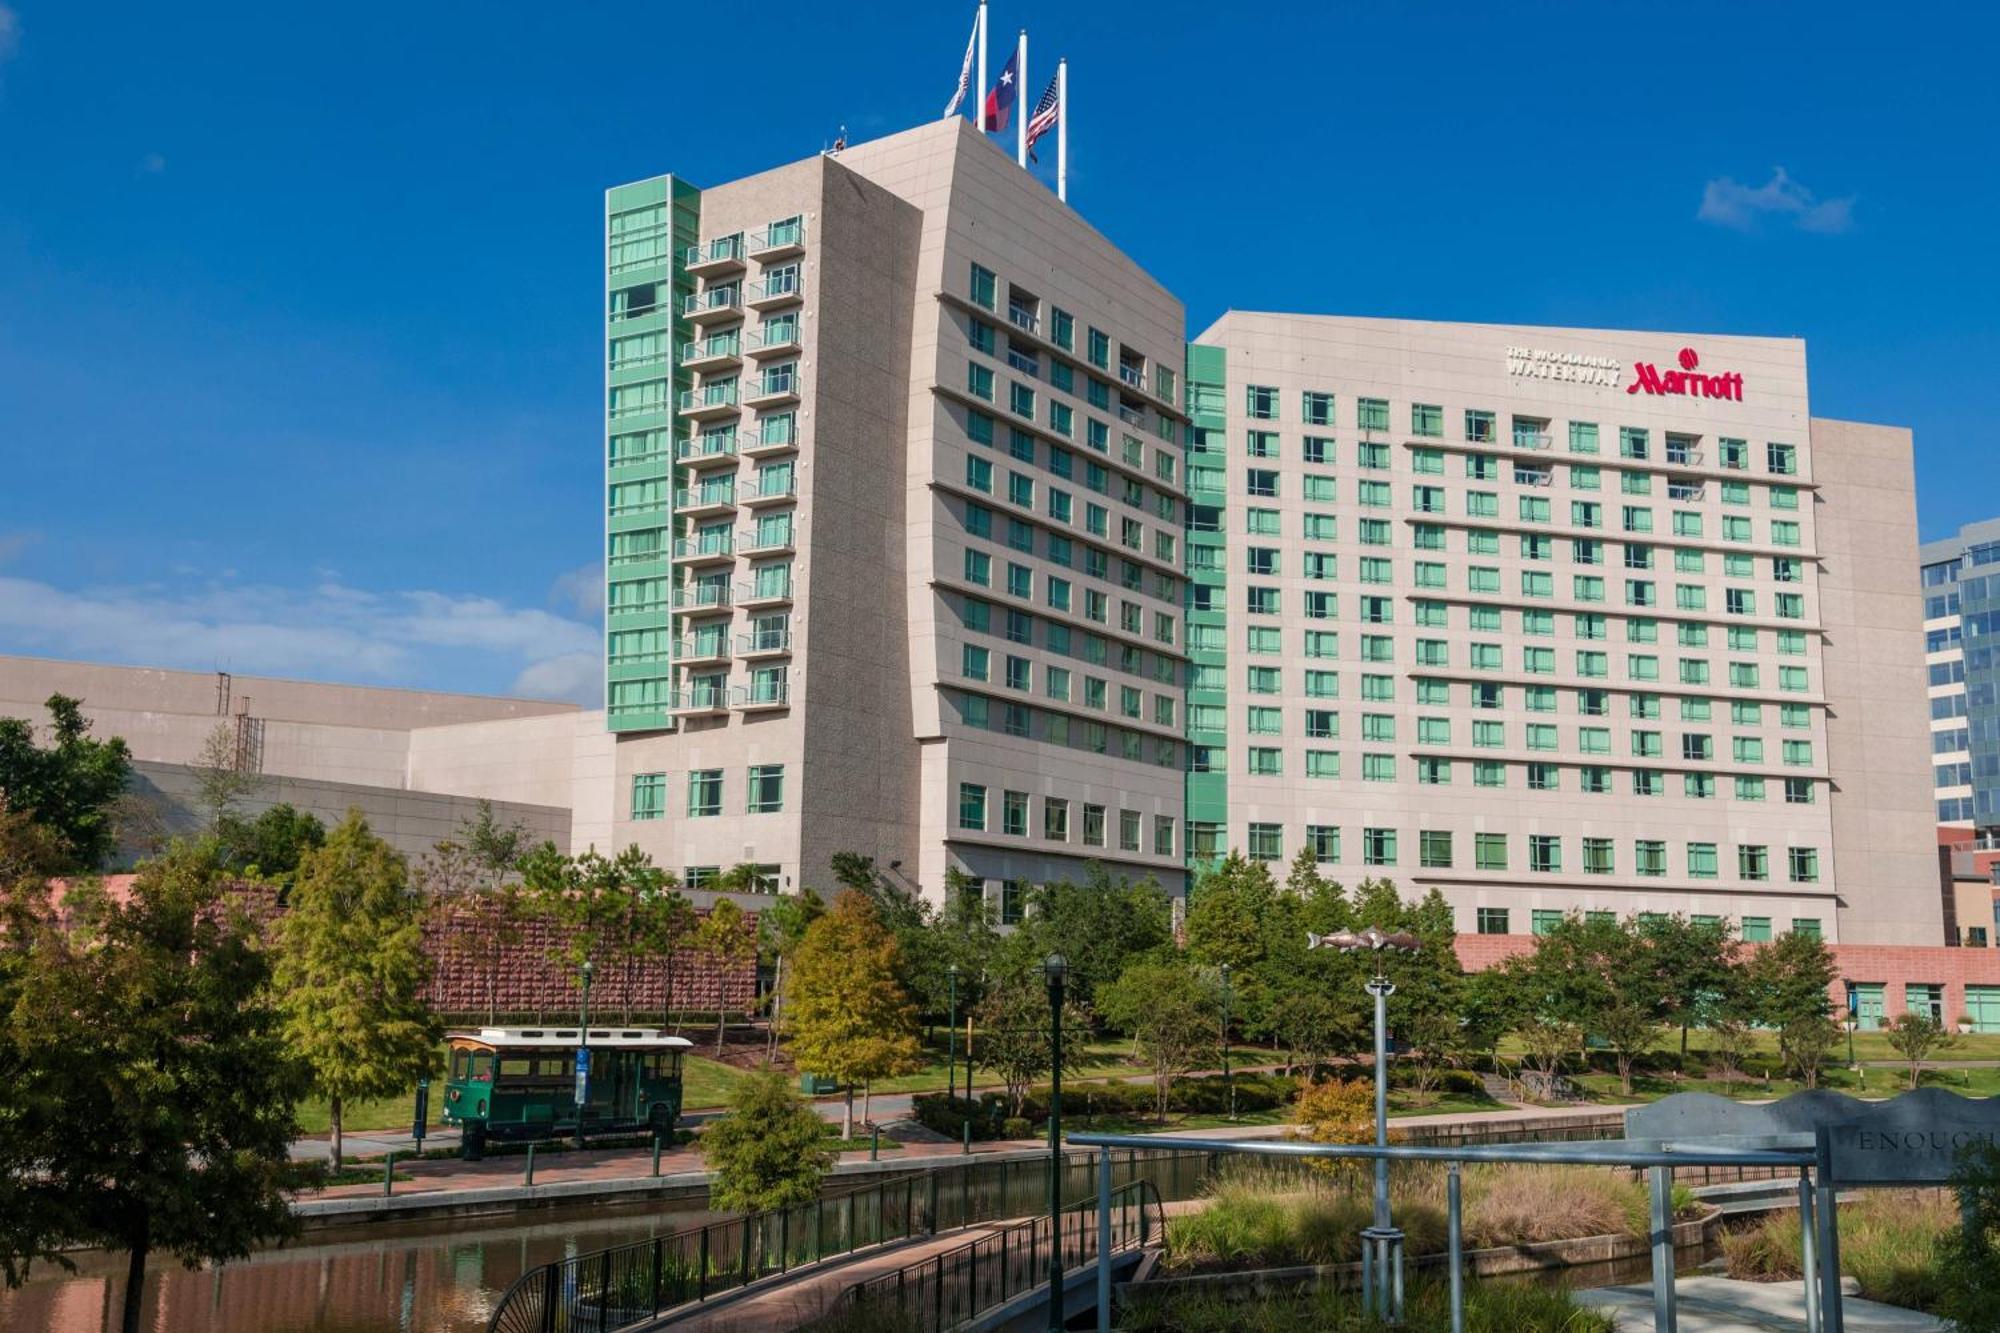 The Woodlands Waterway Marriott Hotel And Convention Center Exterior photo